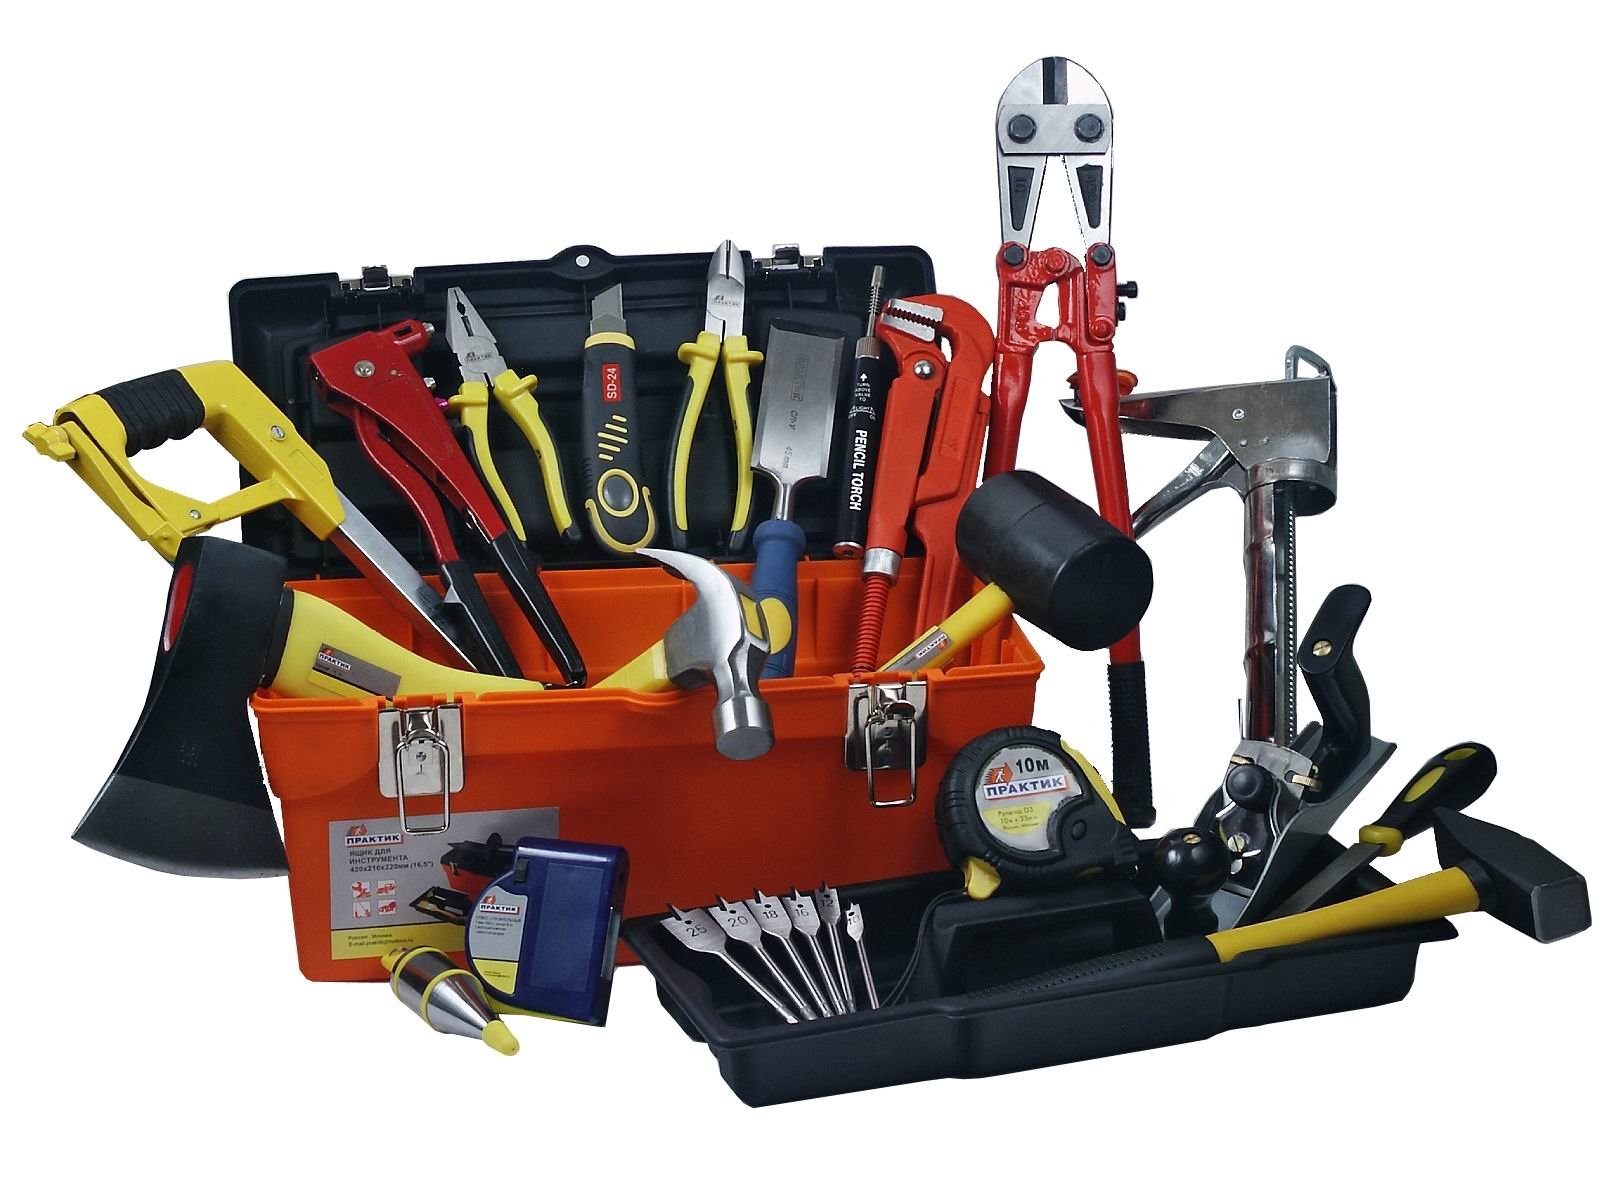 TOP 10 Russian manufacturers of hand tools (companies and firms)